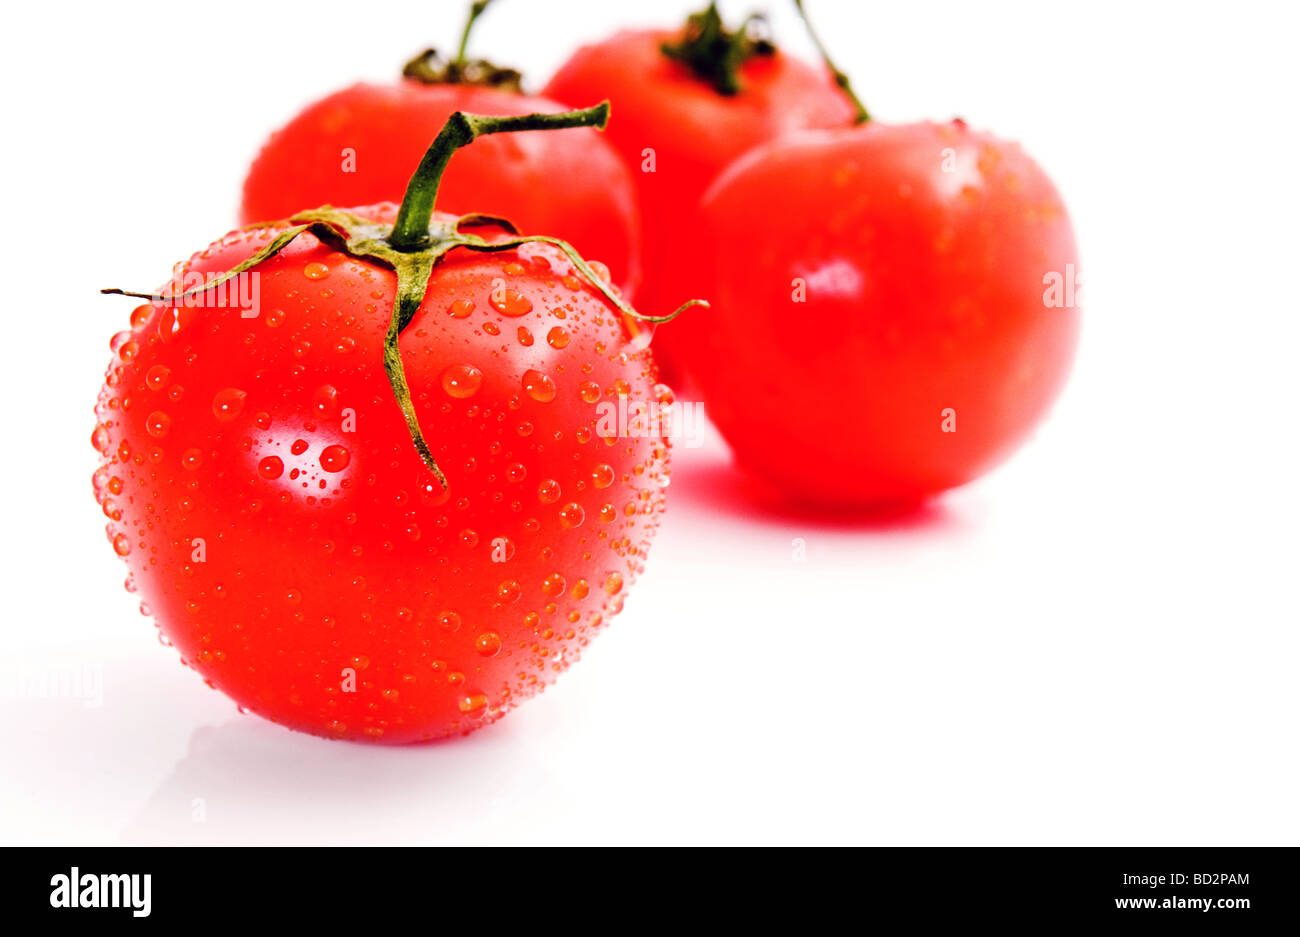 Tomato isolated on white Banque D'Images